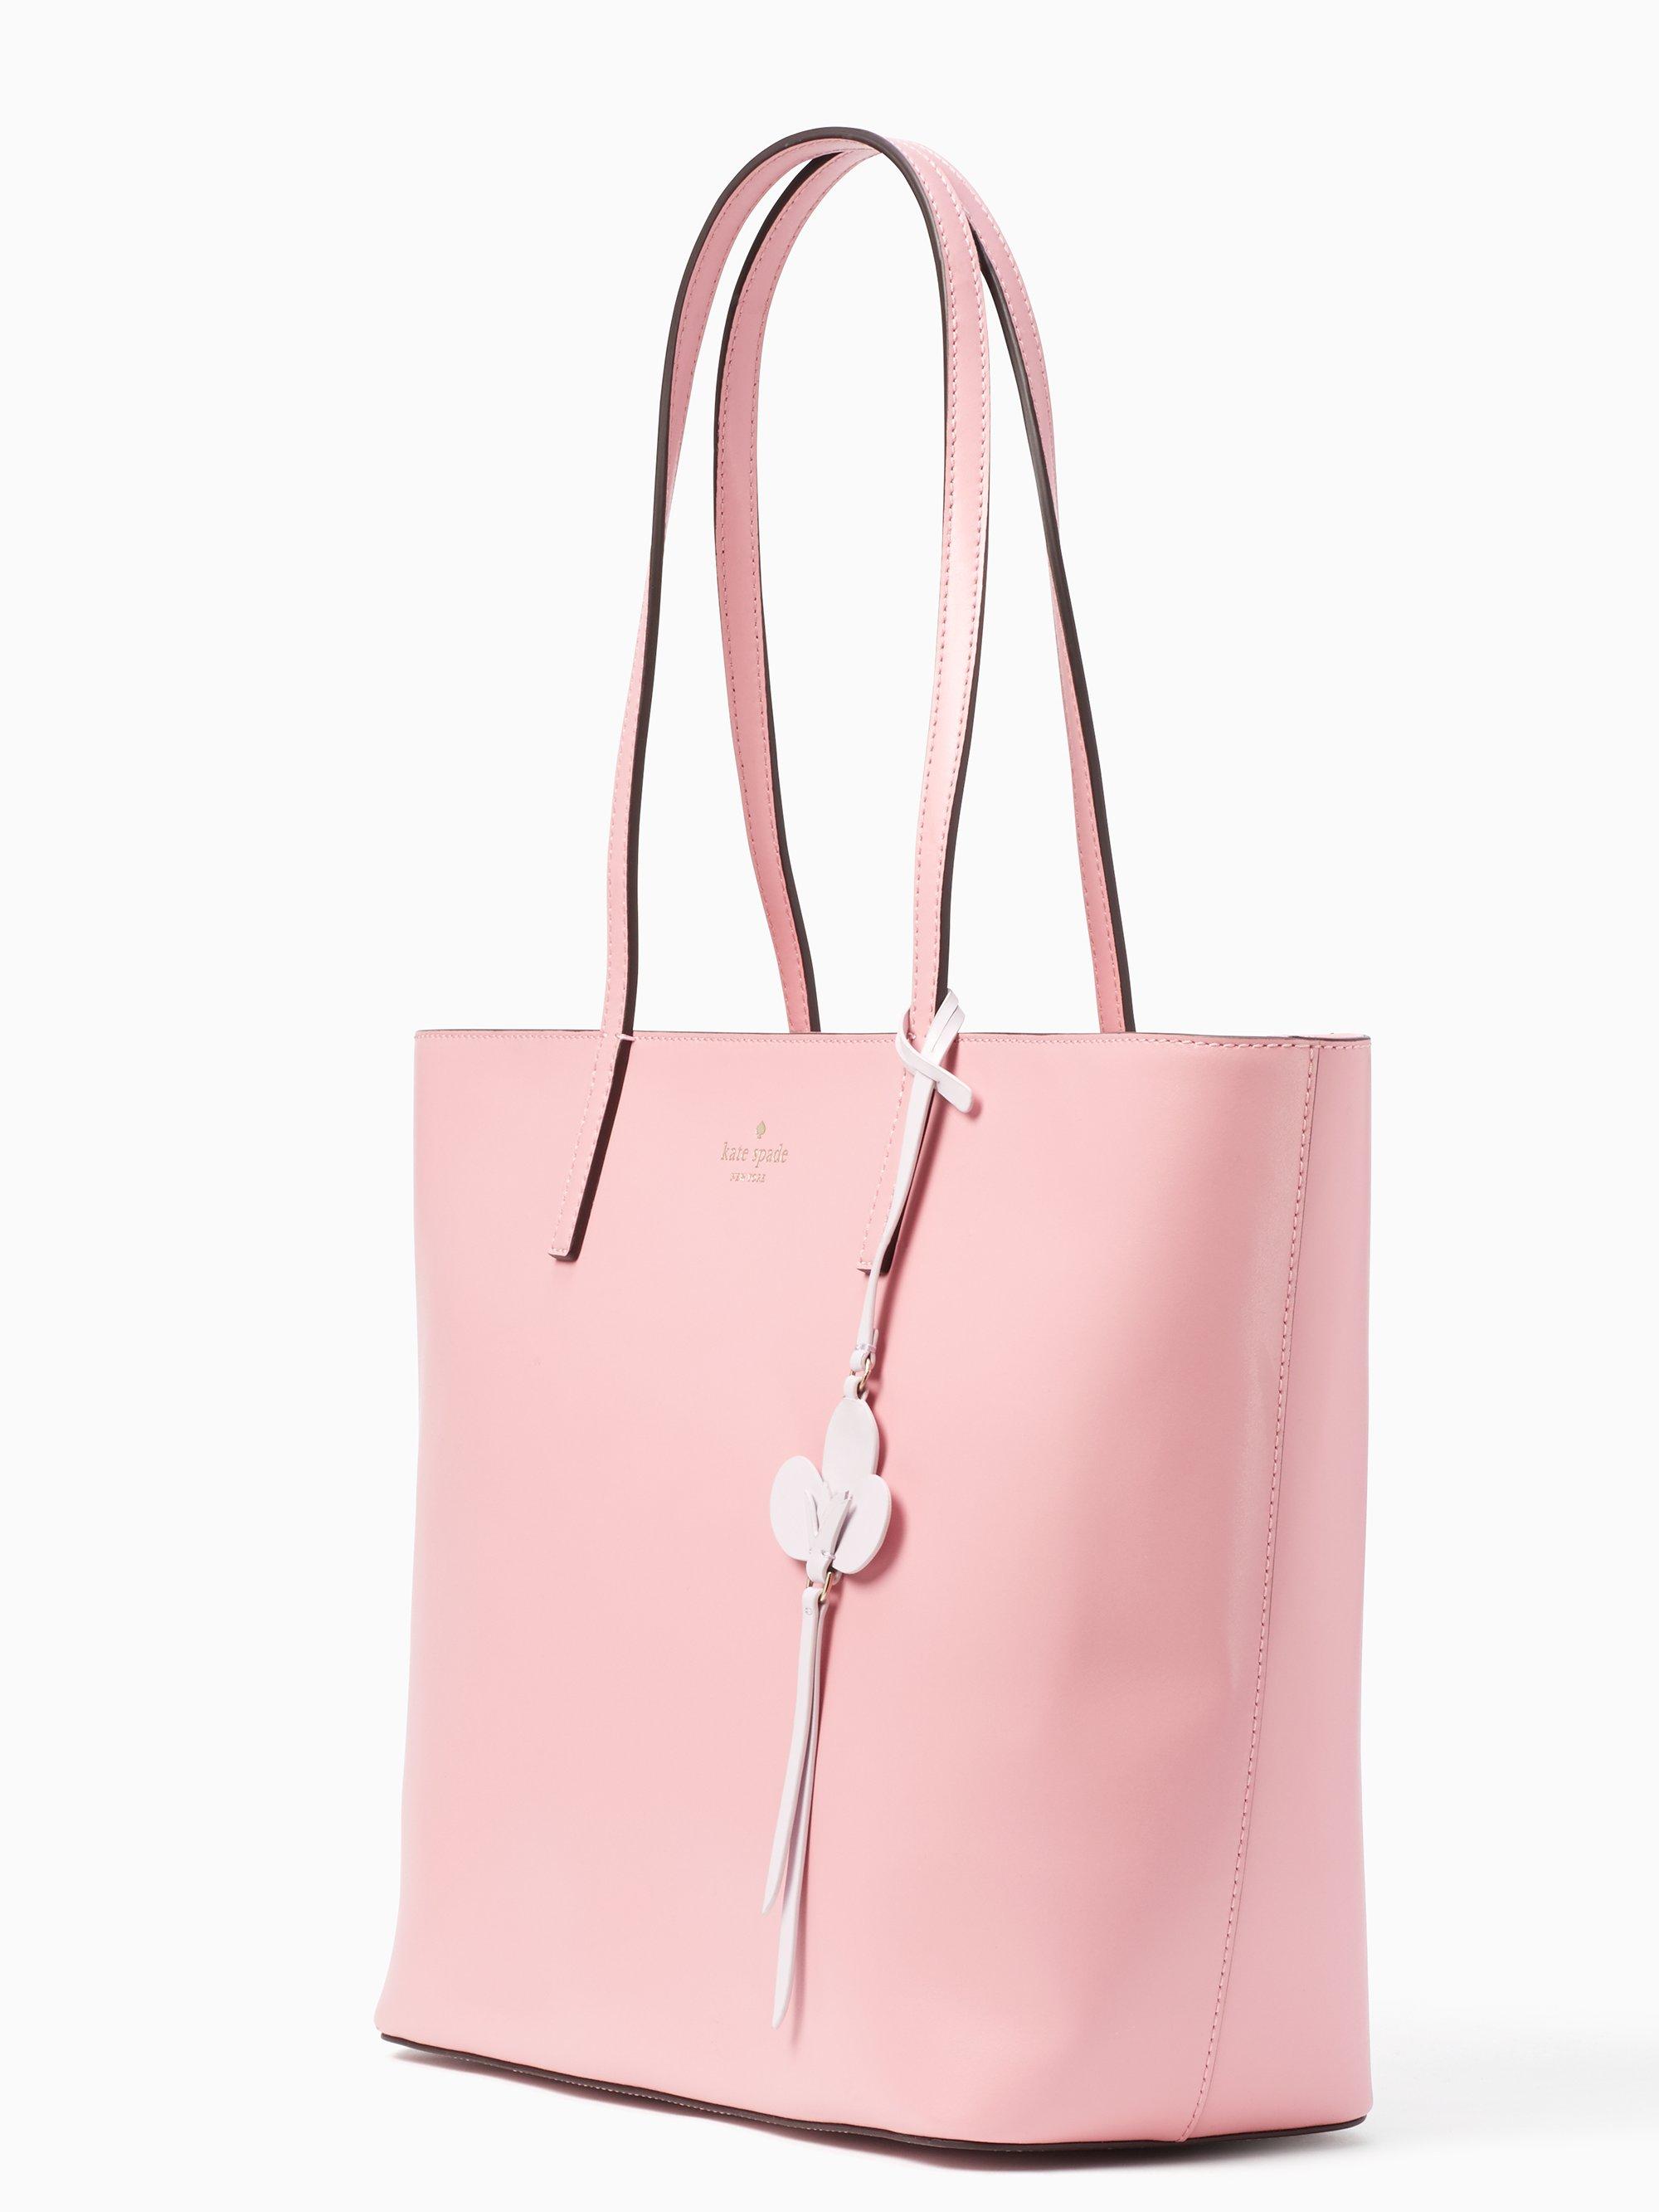 Kate Spade Leather Kelsey Tote in Bright Carnation (Pink) - Lyst